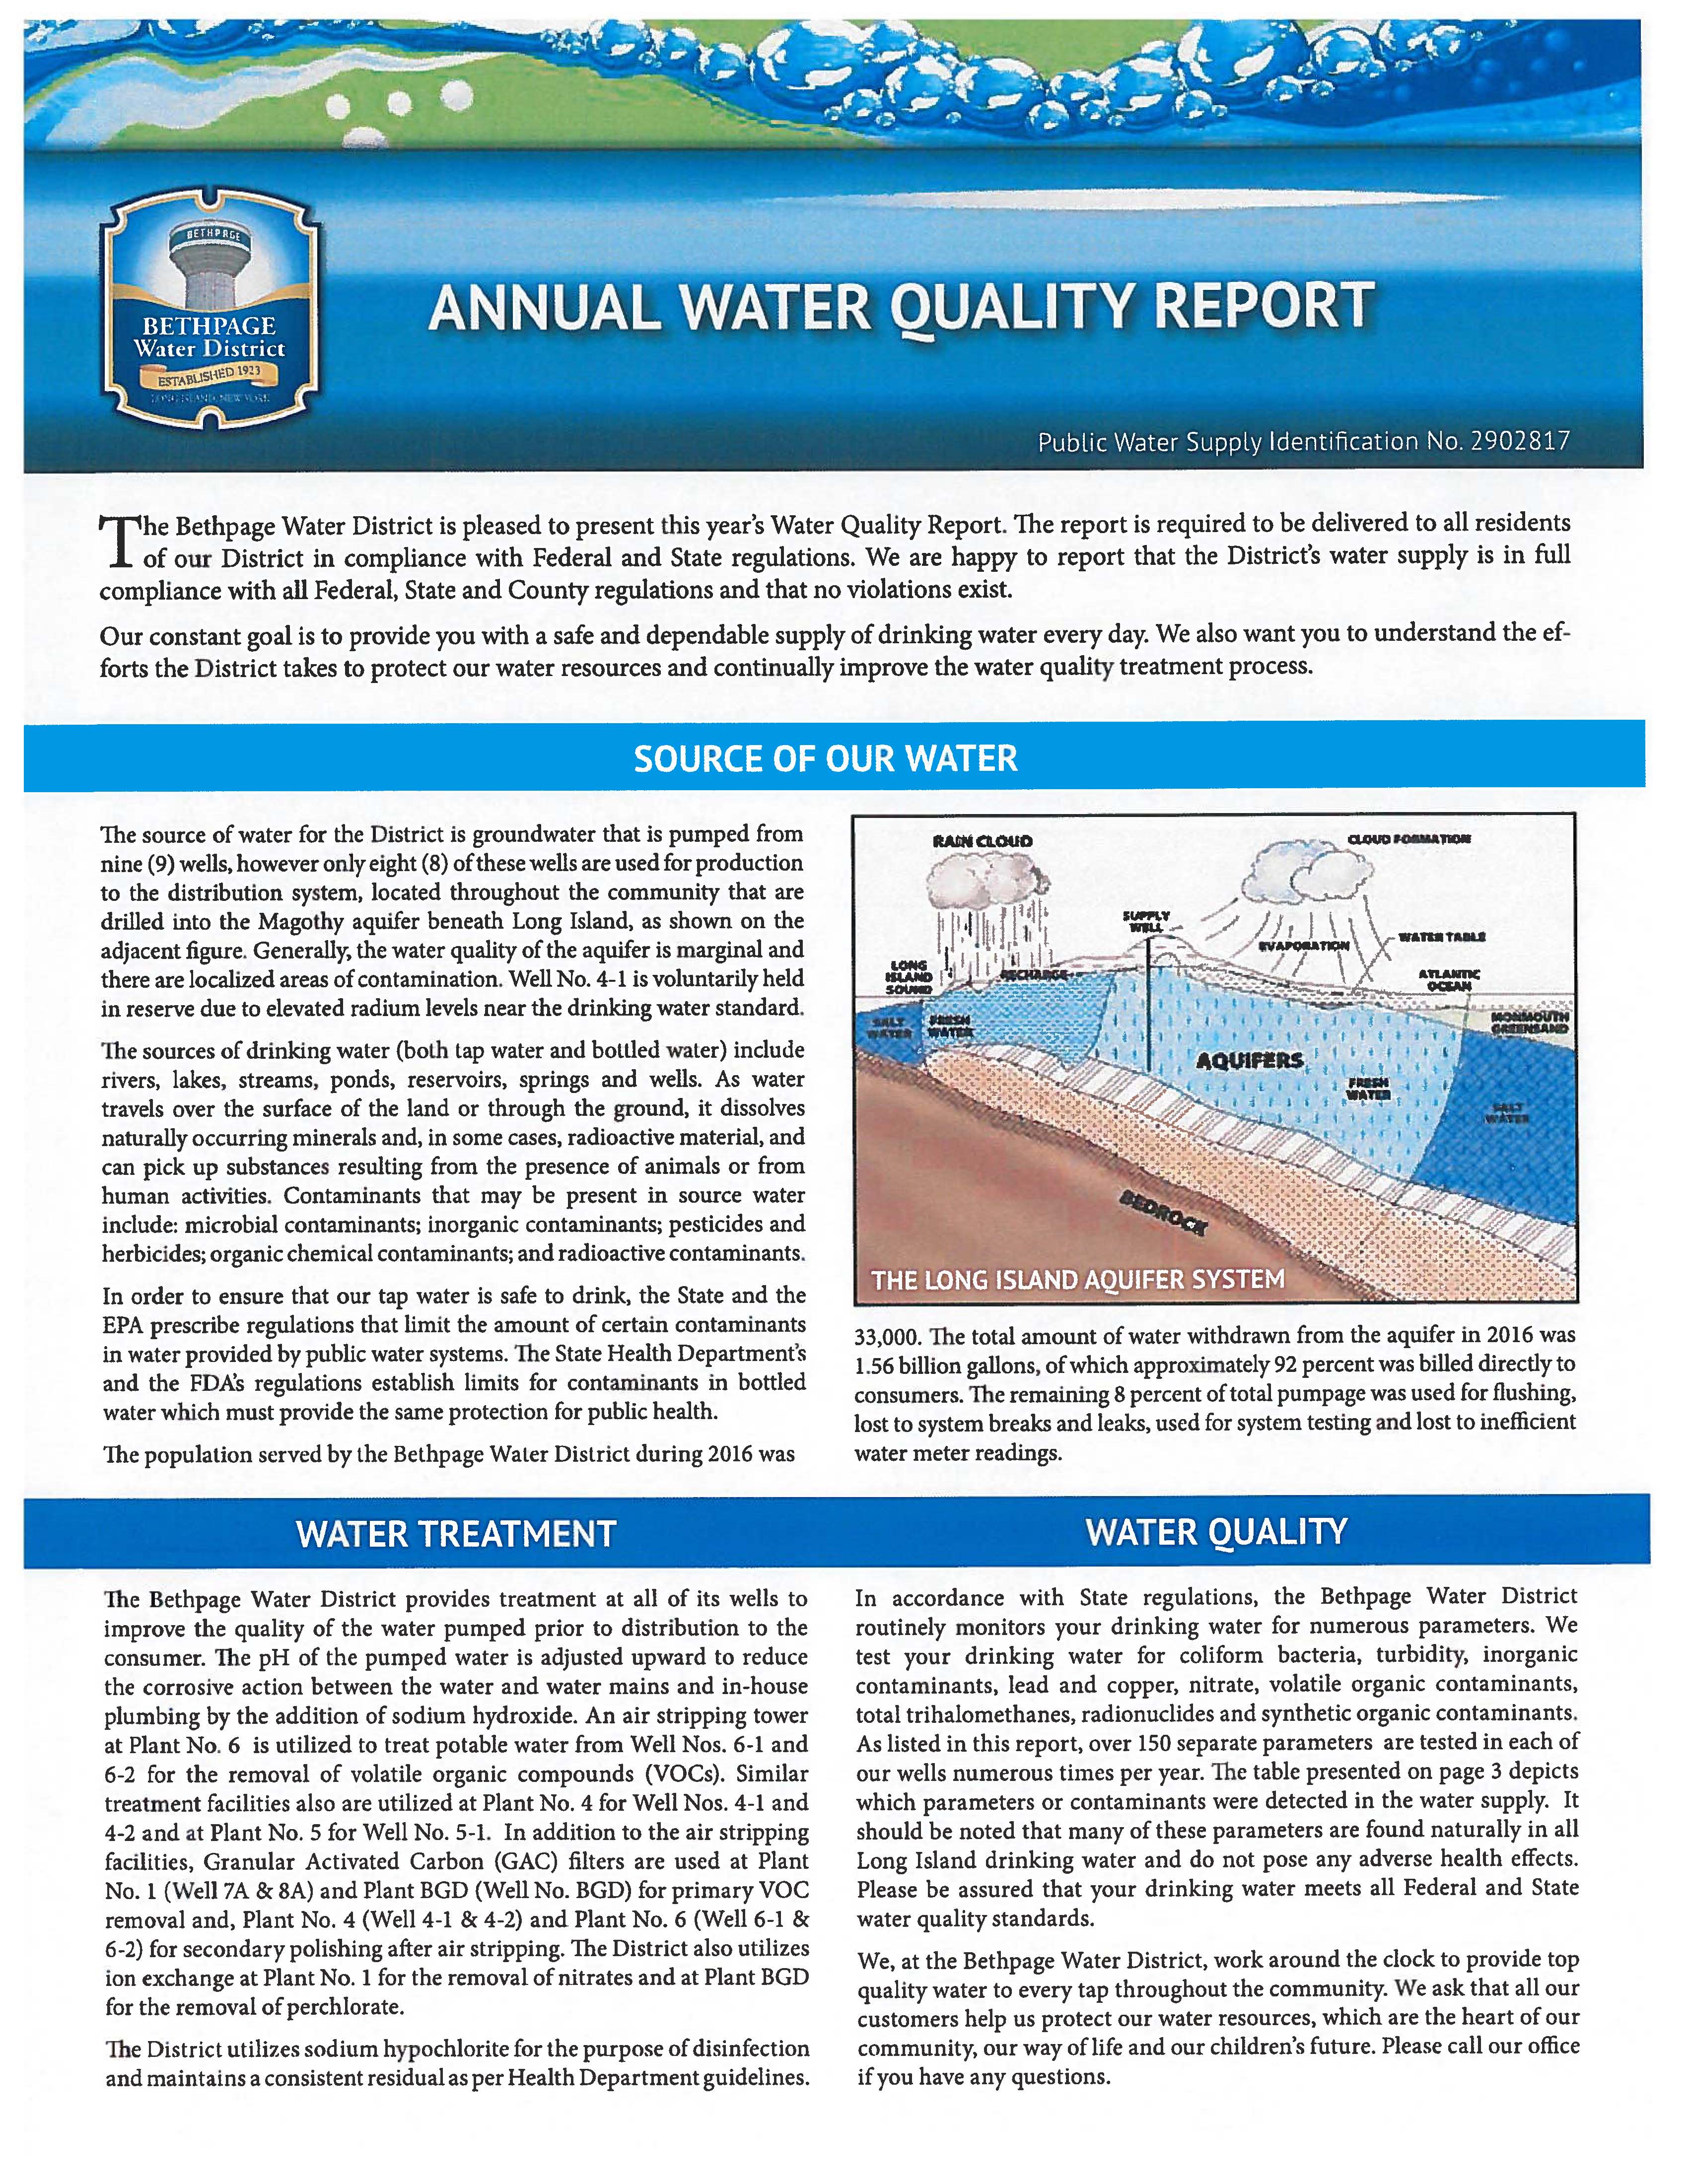 2016 Water Quality Report